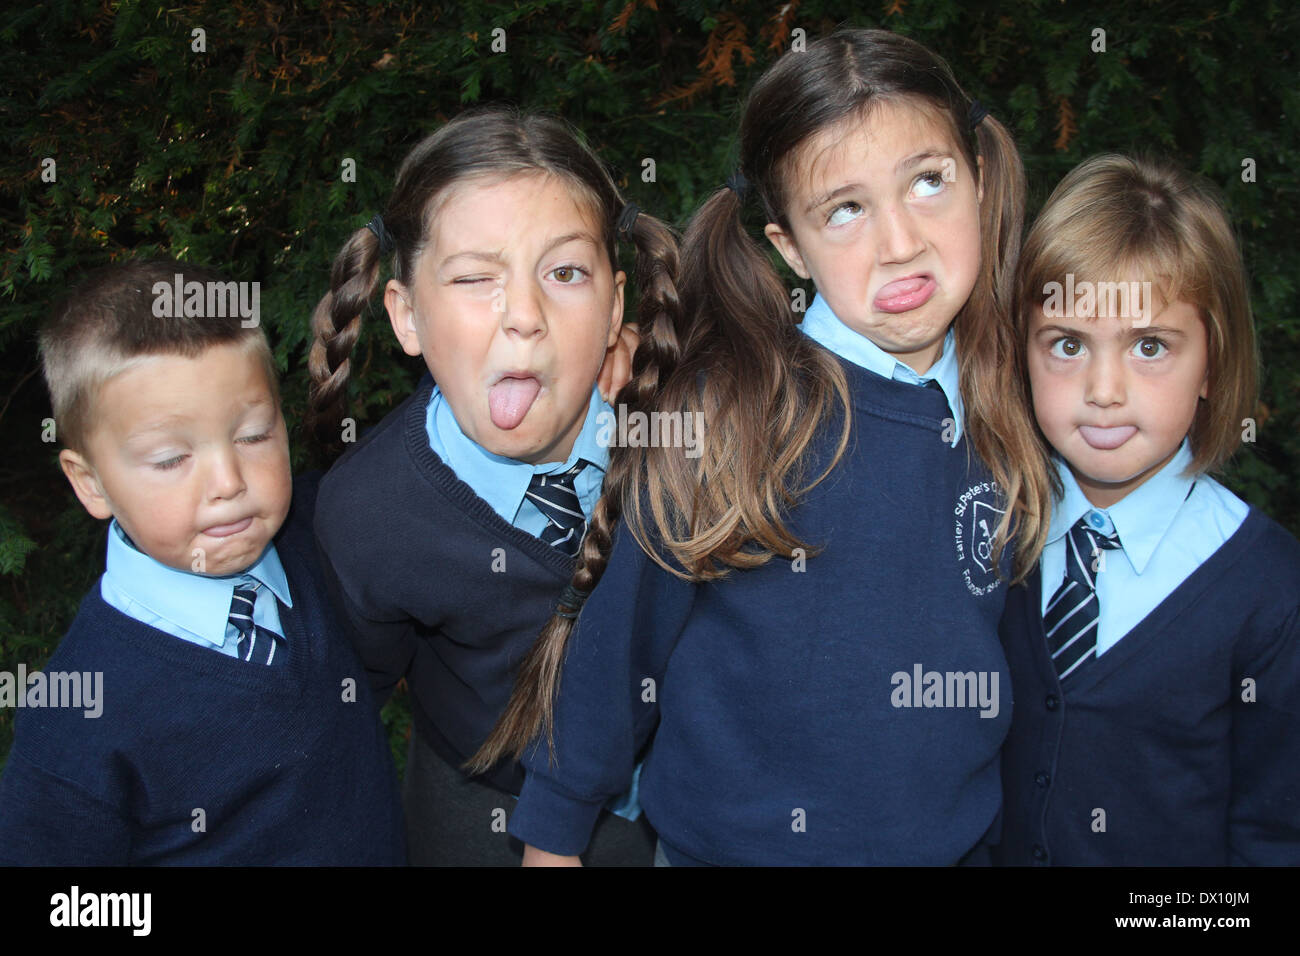 Four children pull funny faces in an alternative to the traditional school photograph, UK, England Stock Photo